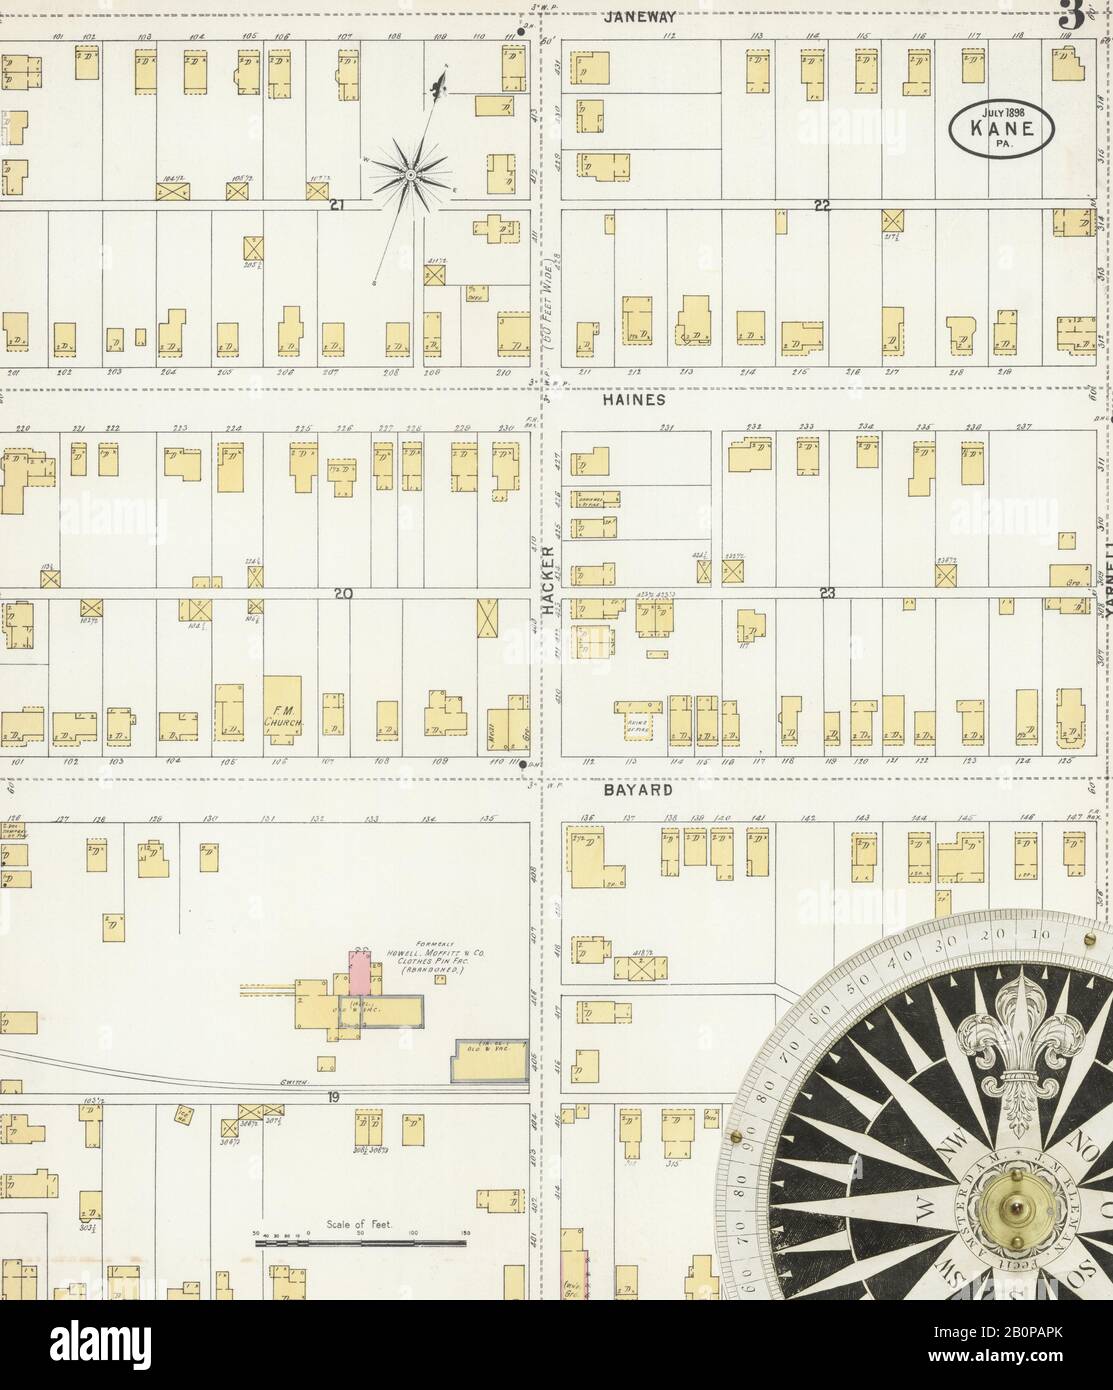 Image 3 of Sanborn Fire Insurance Map from Kane, McKean County, Pennsylvania. Jul 1898. 6 Sheet(s), America, street map with a Nineteenth Century compass Stock Photo